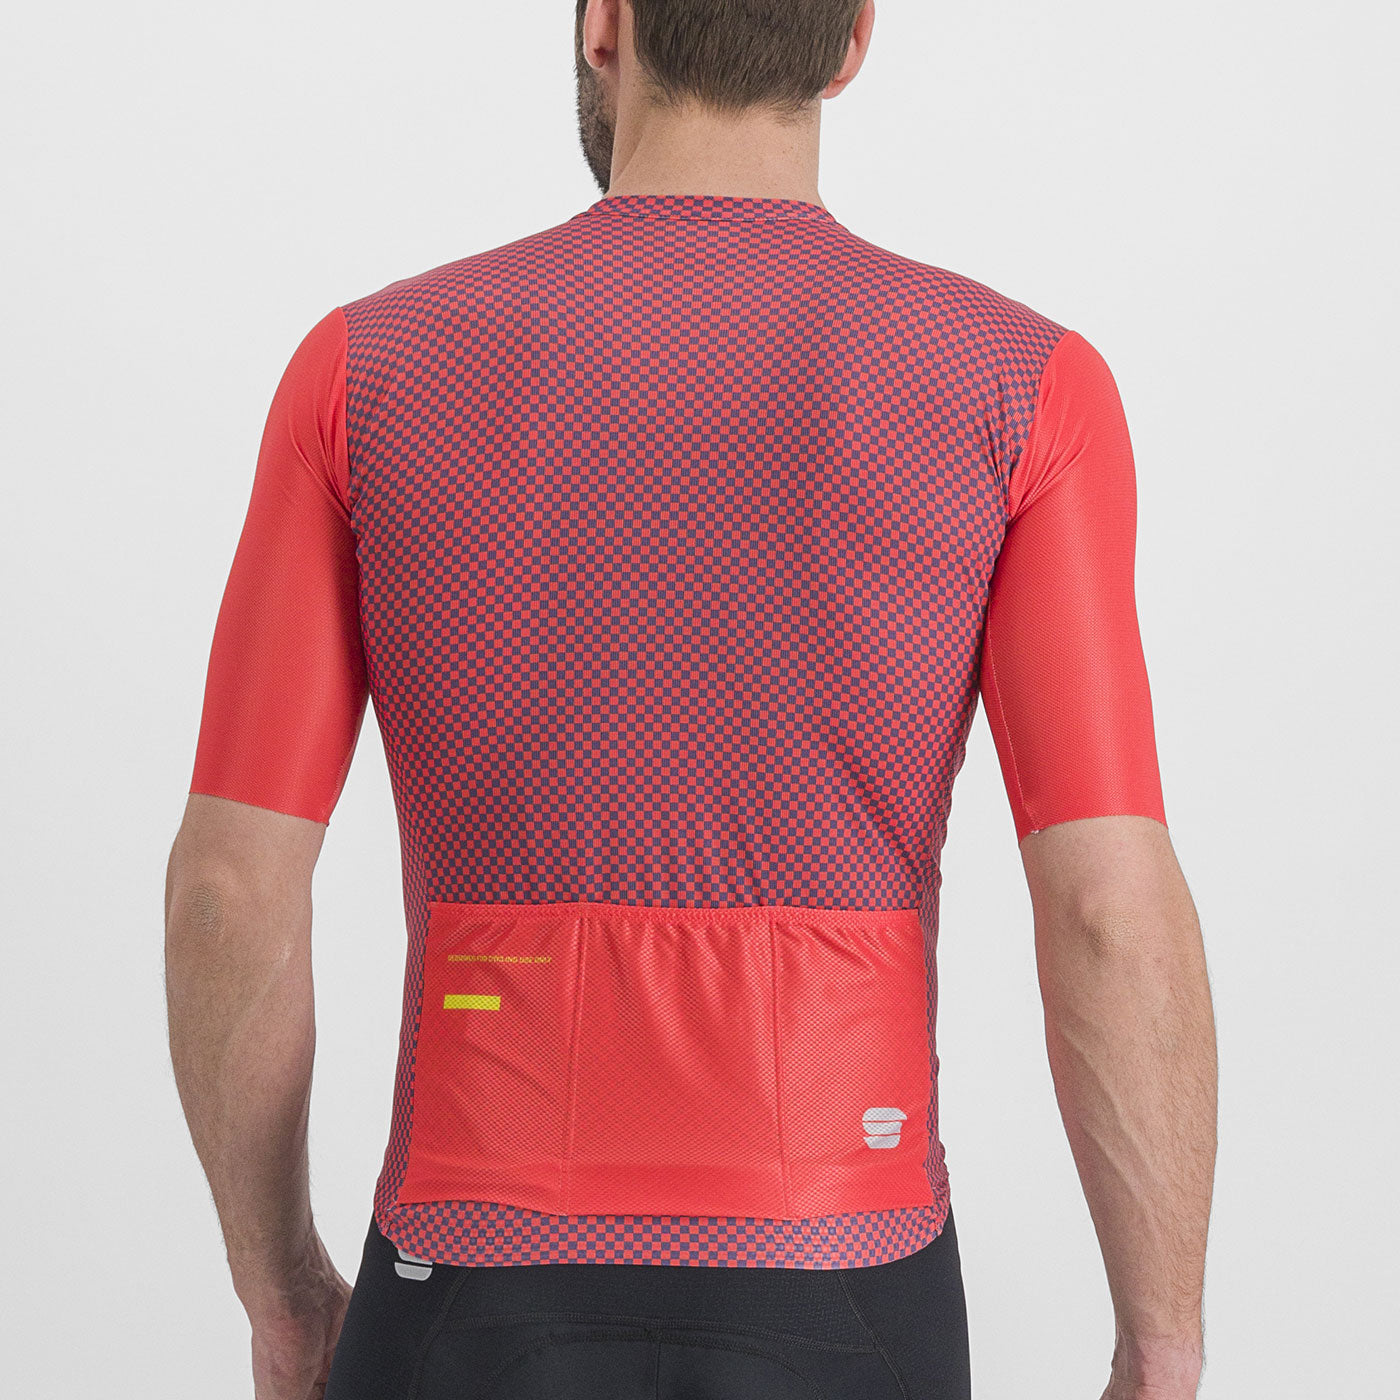 Sportful Checkmate jersey - Red violet | All4cycling